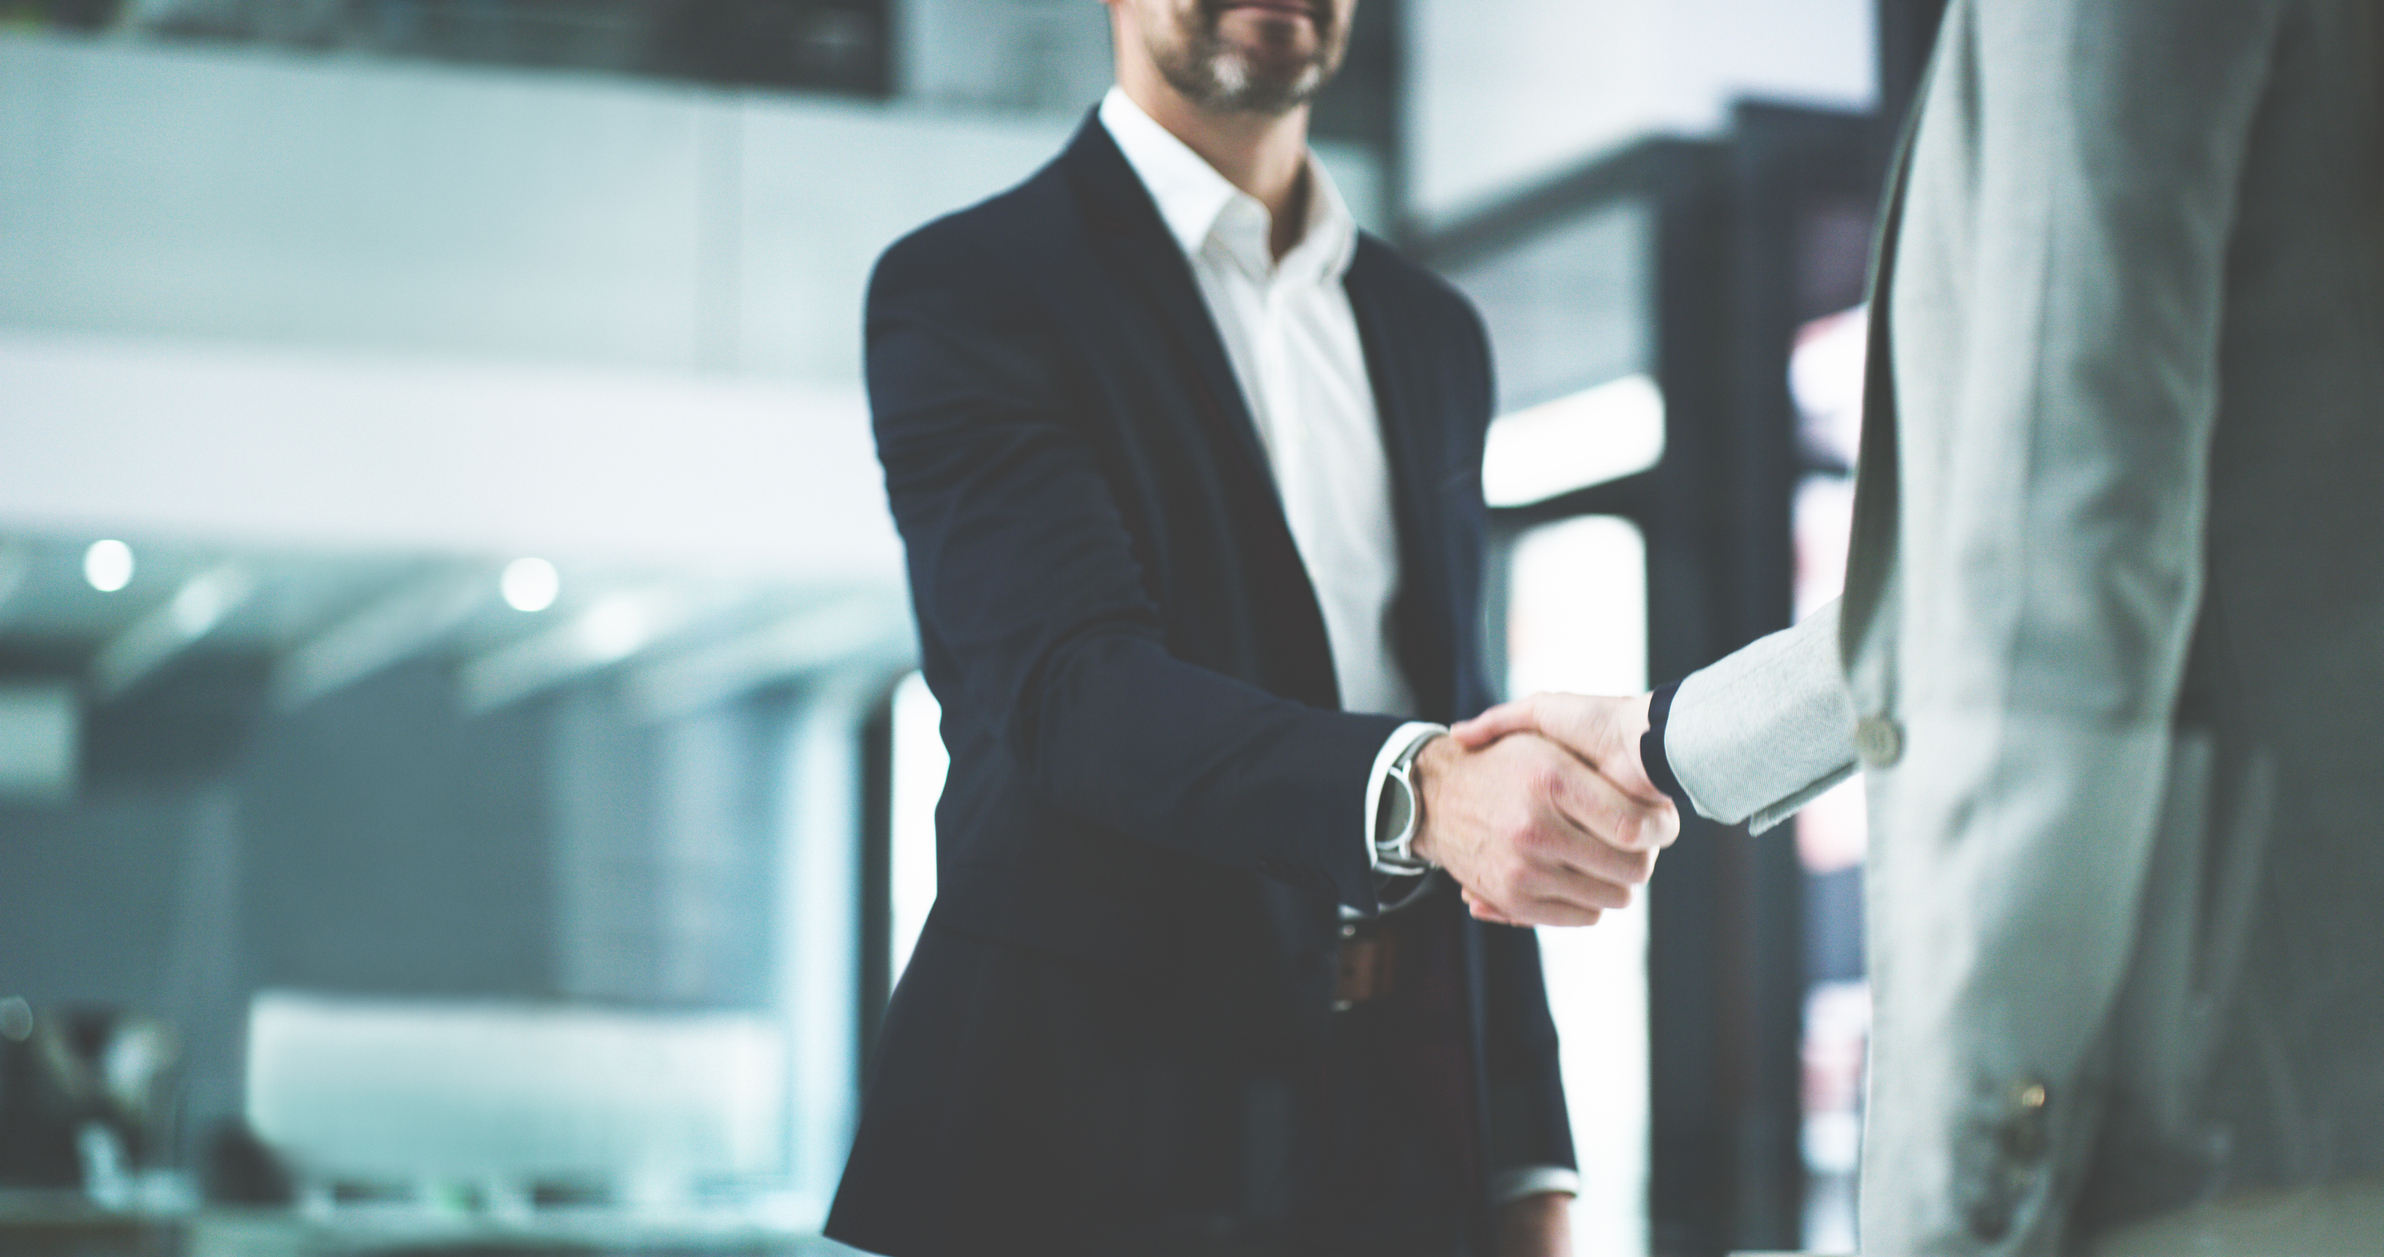 Closeup shot of two businesspeople shaking hands in an office